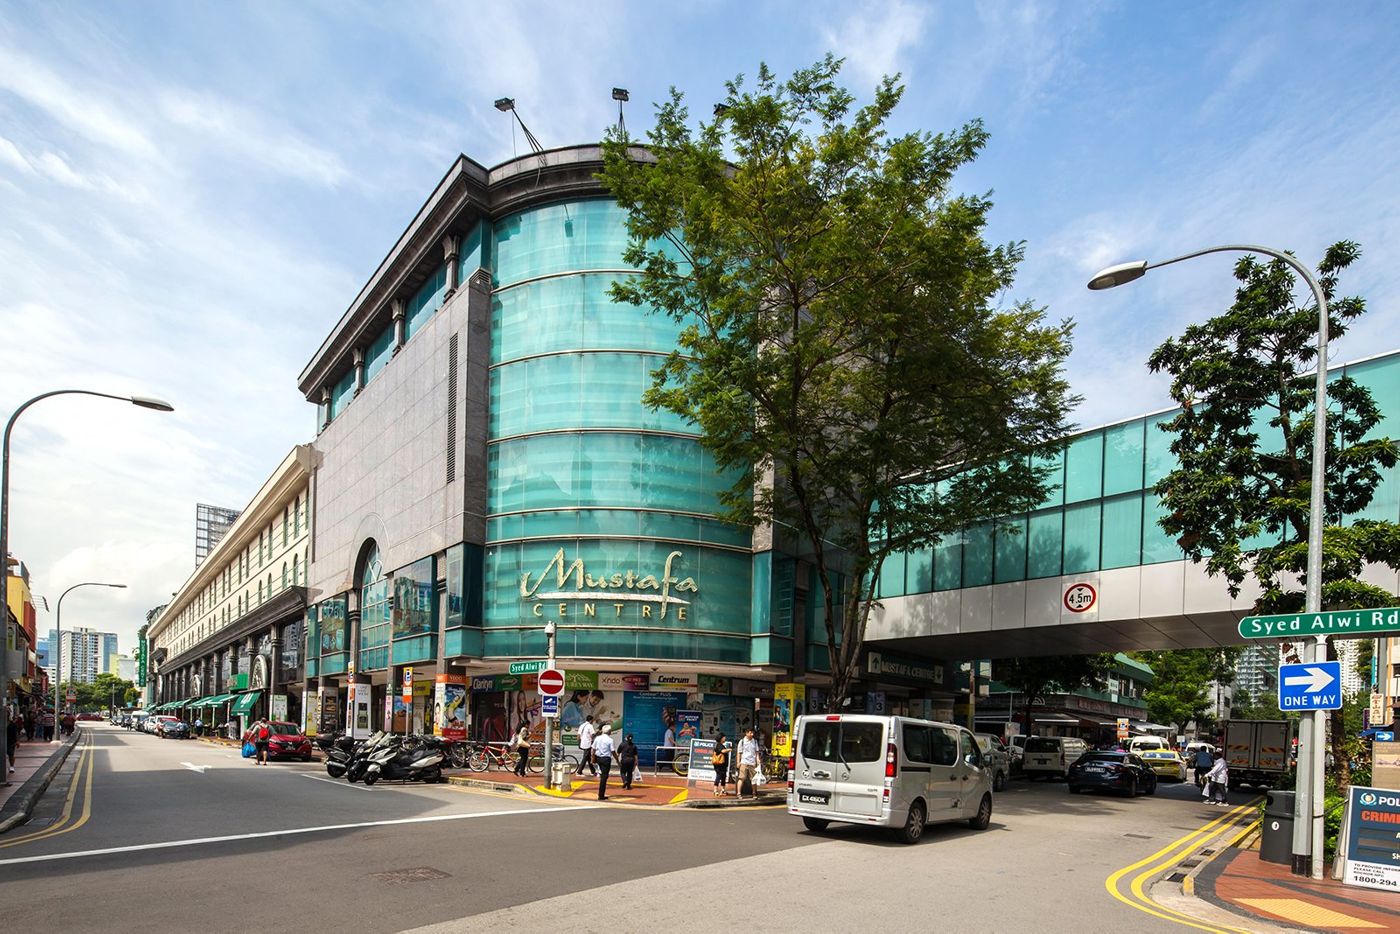 The amazing things to do in Little India, Singapore